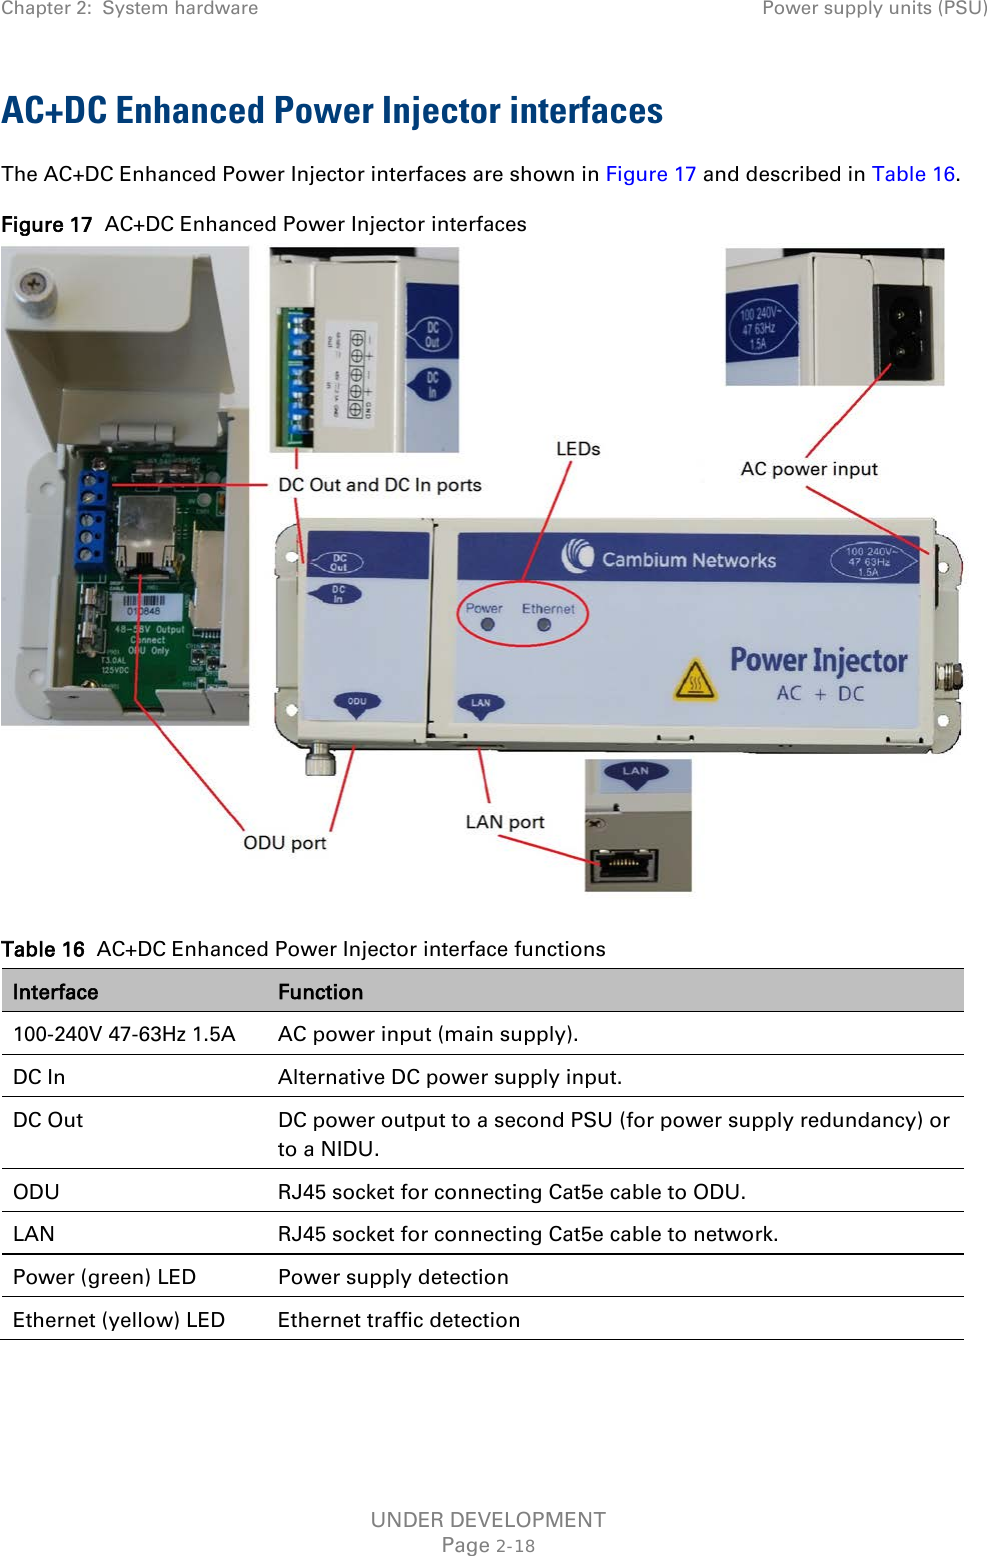 Chapter 2:  System hardware Power supply units (PSU)  AC+DC Enhanced Power Injector interfaces The AC+DC Enhanced Power Injector interfaces are shown in Figure 17 and described in Table 16. Figure 17  AC+DC Enhanced Power Injector interfaces  Table 16  AC+DC Enhanced Power Injector interface functions Interface Function 100-240V 47-63Hz 1.5A  AC power input (main supply). DC In Alternative DC power supply input.  DC Out DC power output to a second PSU (for power supply redundancy) or to a NIDU.  ODU RJ45 socket for connecting Cat5e cable to ODU. LAN RJ45 socket for connecting Cat5e cable to network. Power (green) LED Power supply detection Ethernet (yellow) LED Ethernet traffic detection  UNDER DEVELOPMENT Page 2-18 